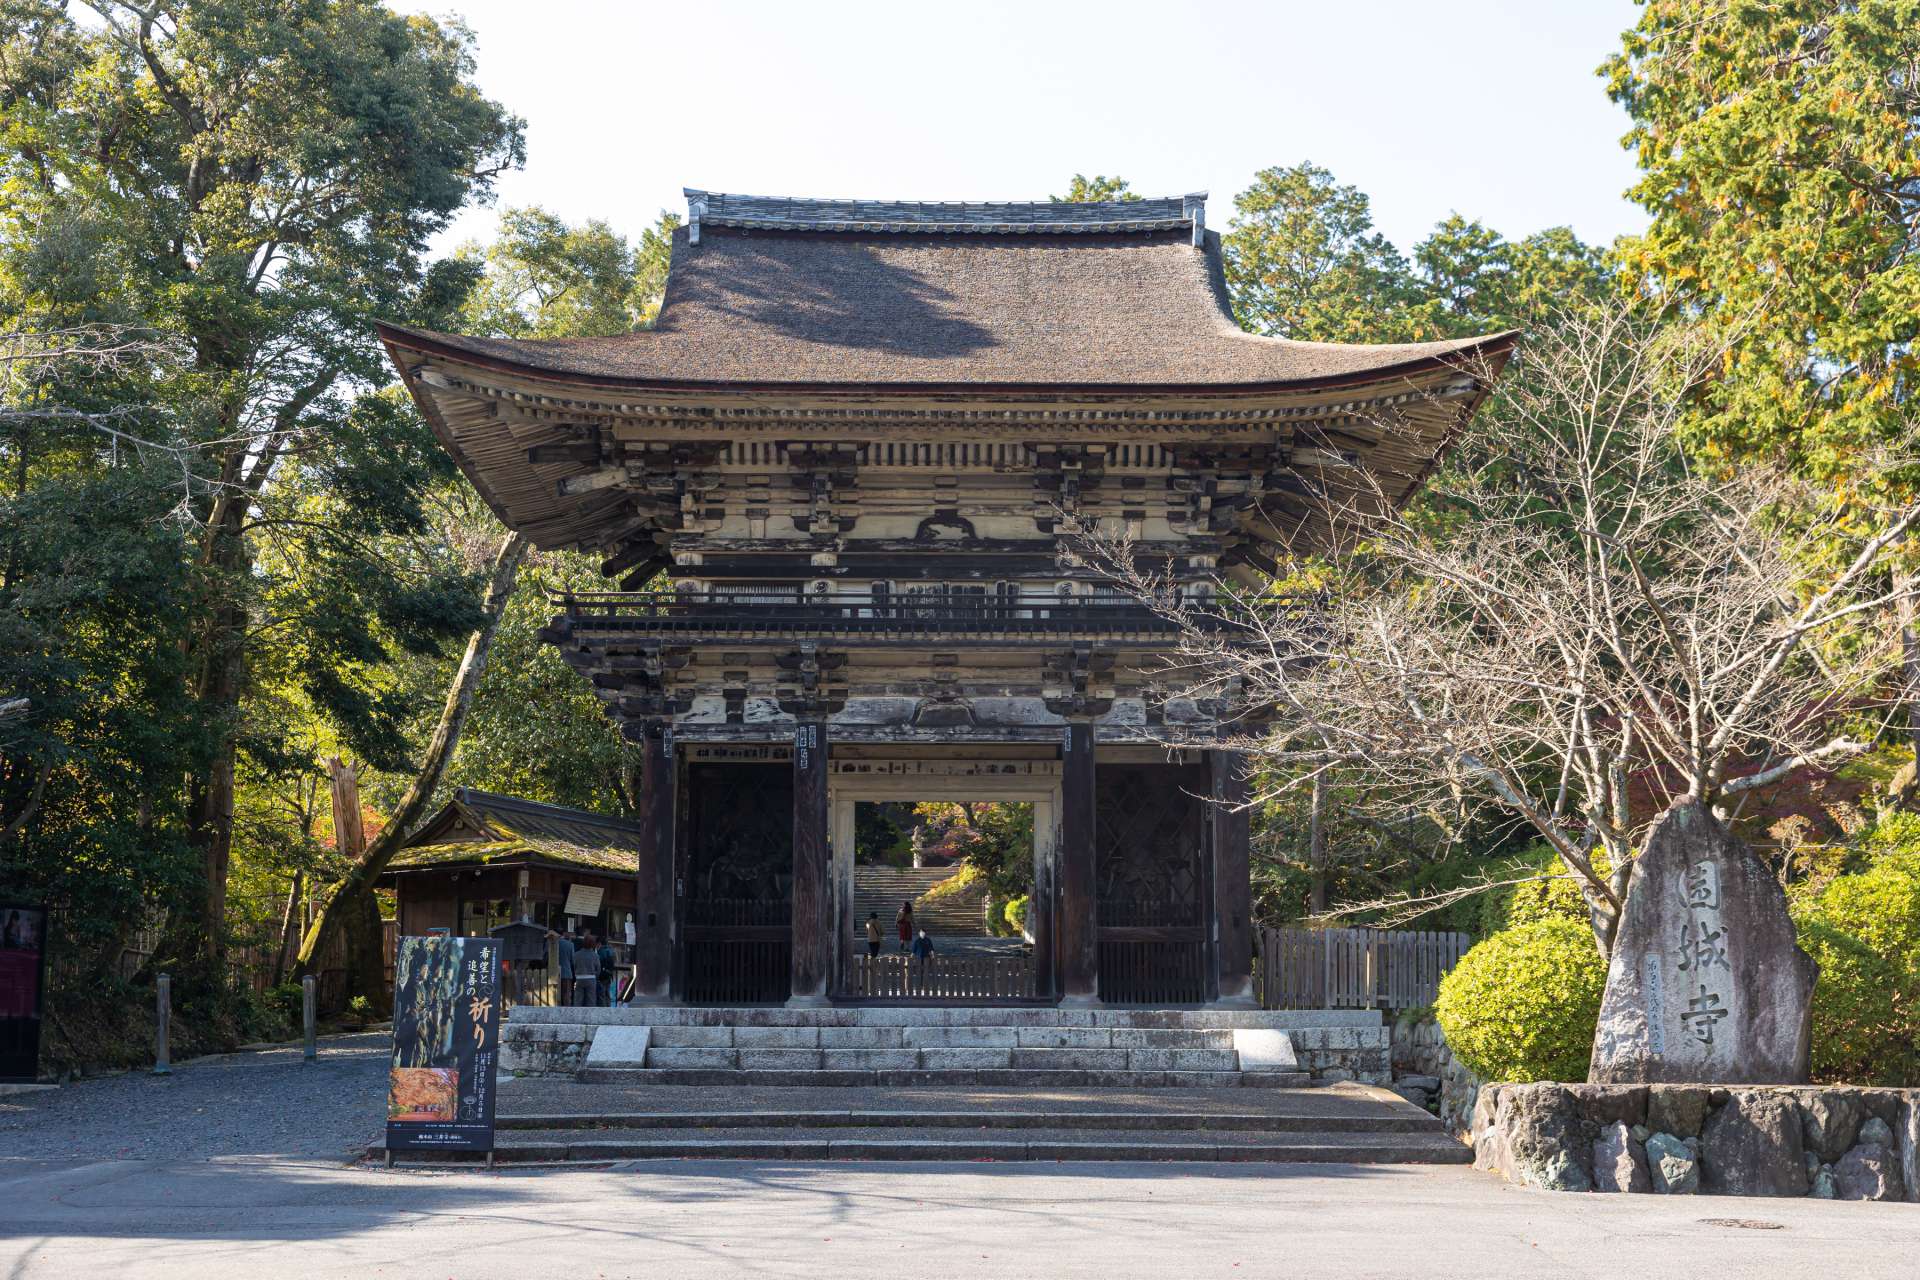 The front entrance of Mii-dera Temple, Daimon. The formal name for the temple, Onjo-ji  is inscribed on the stone monument to the right.